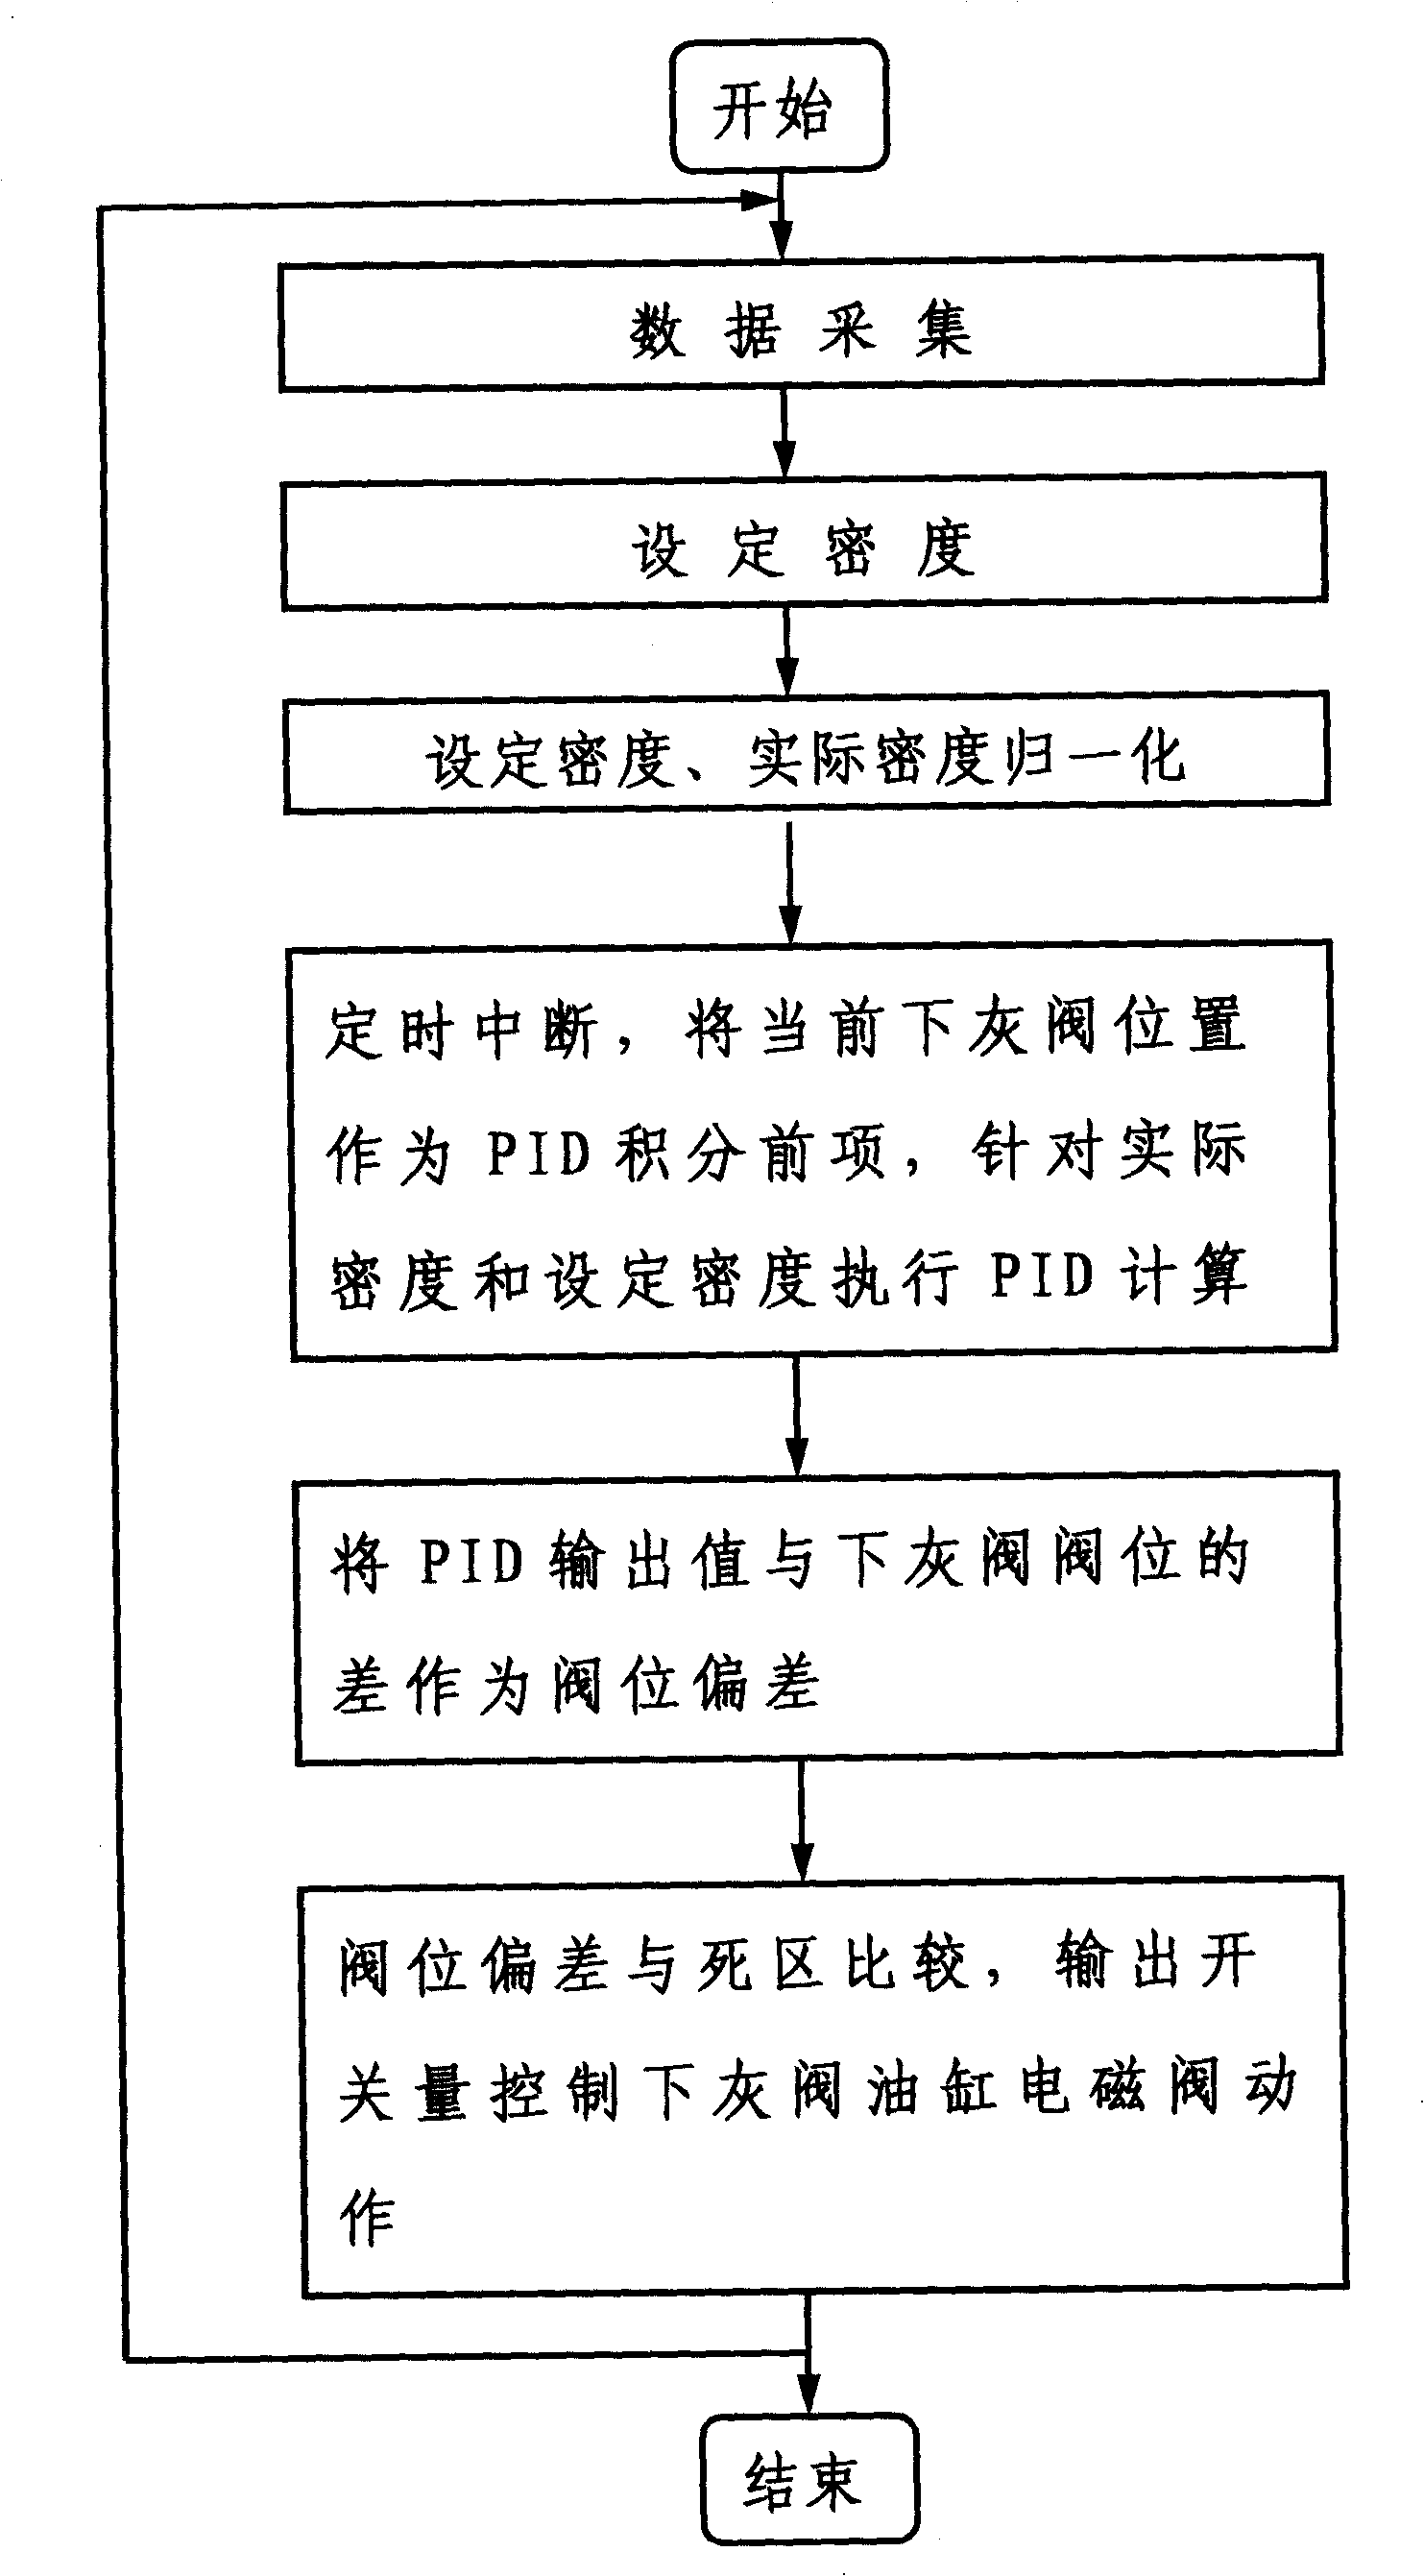 System and control method for automatically compounding cement paste